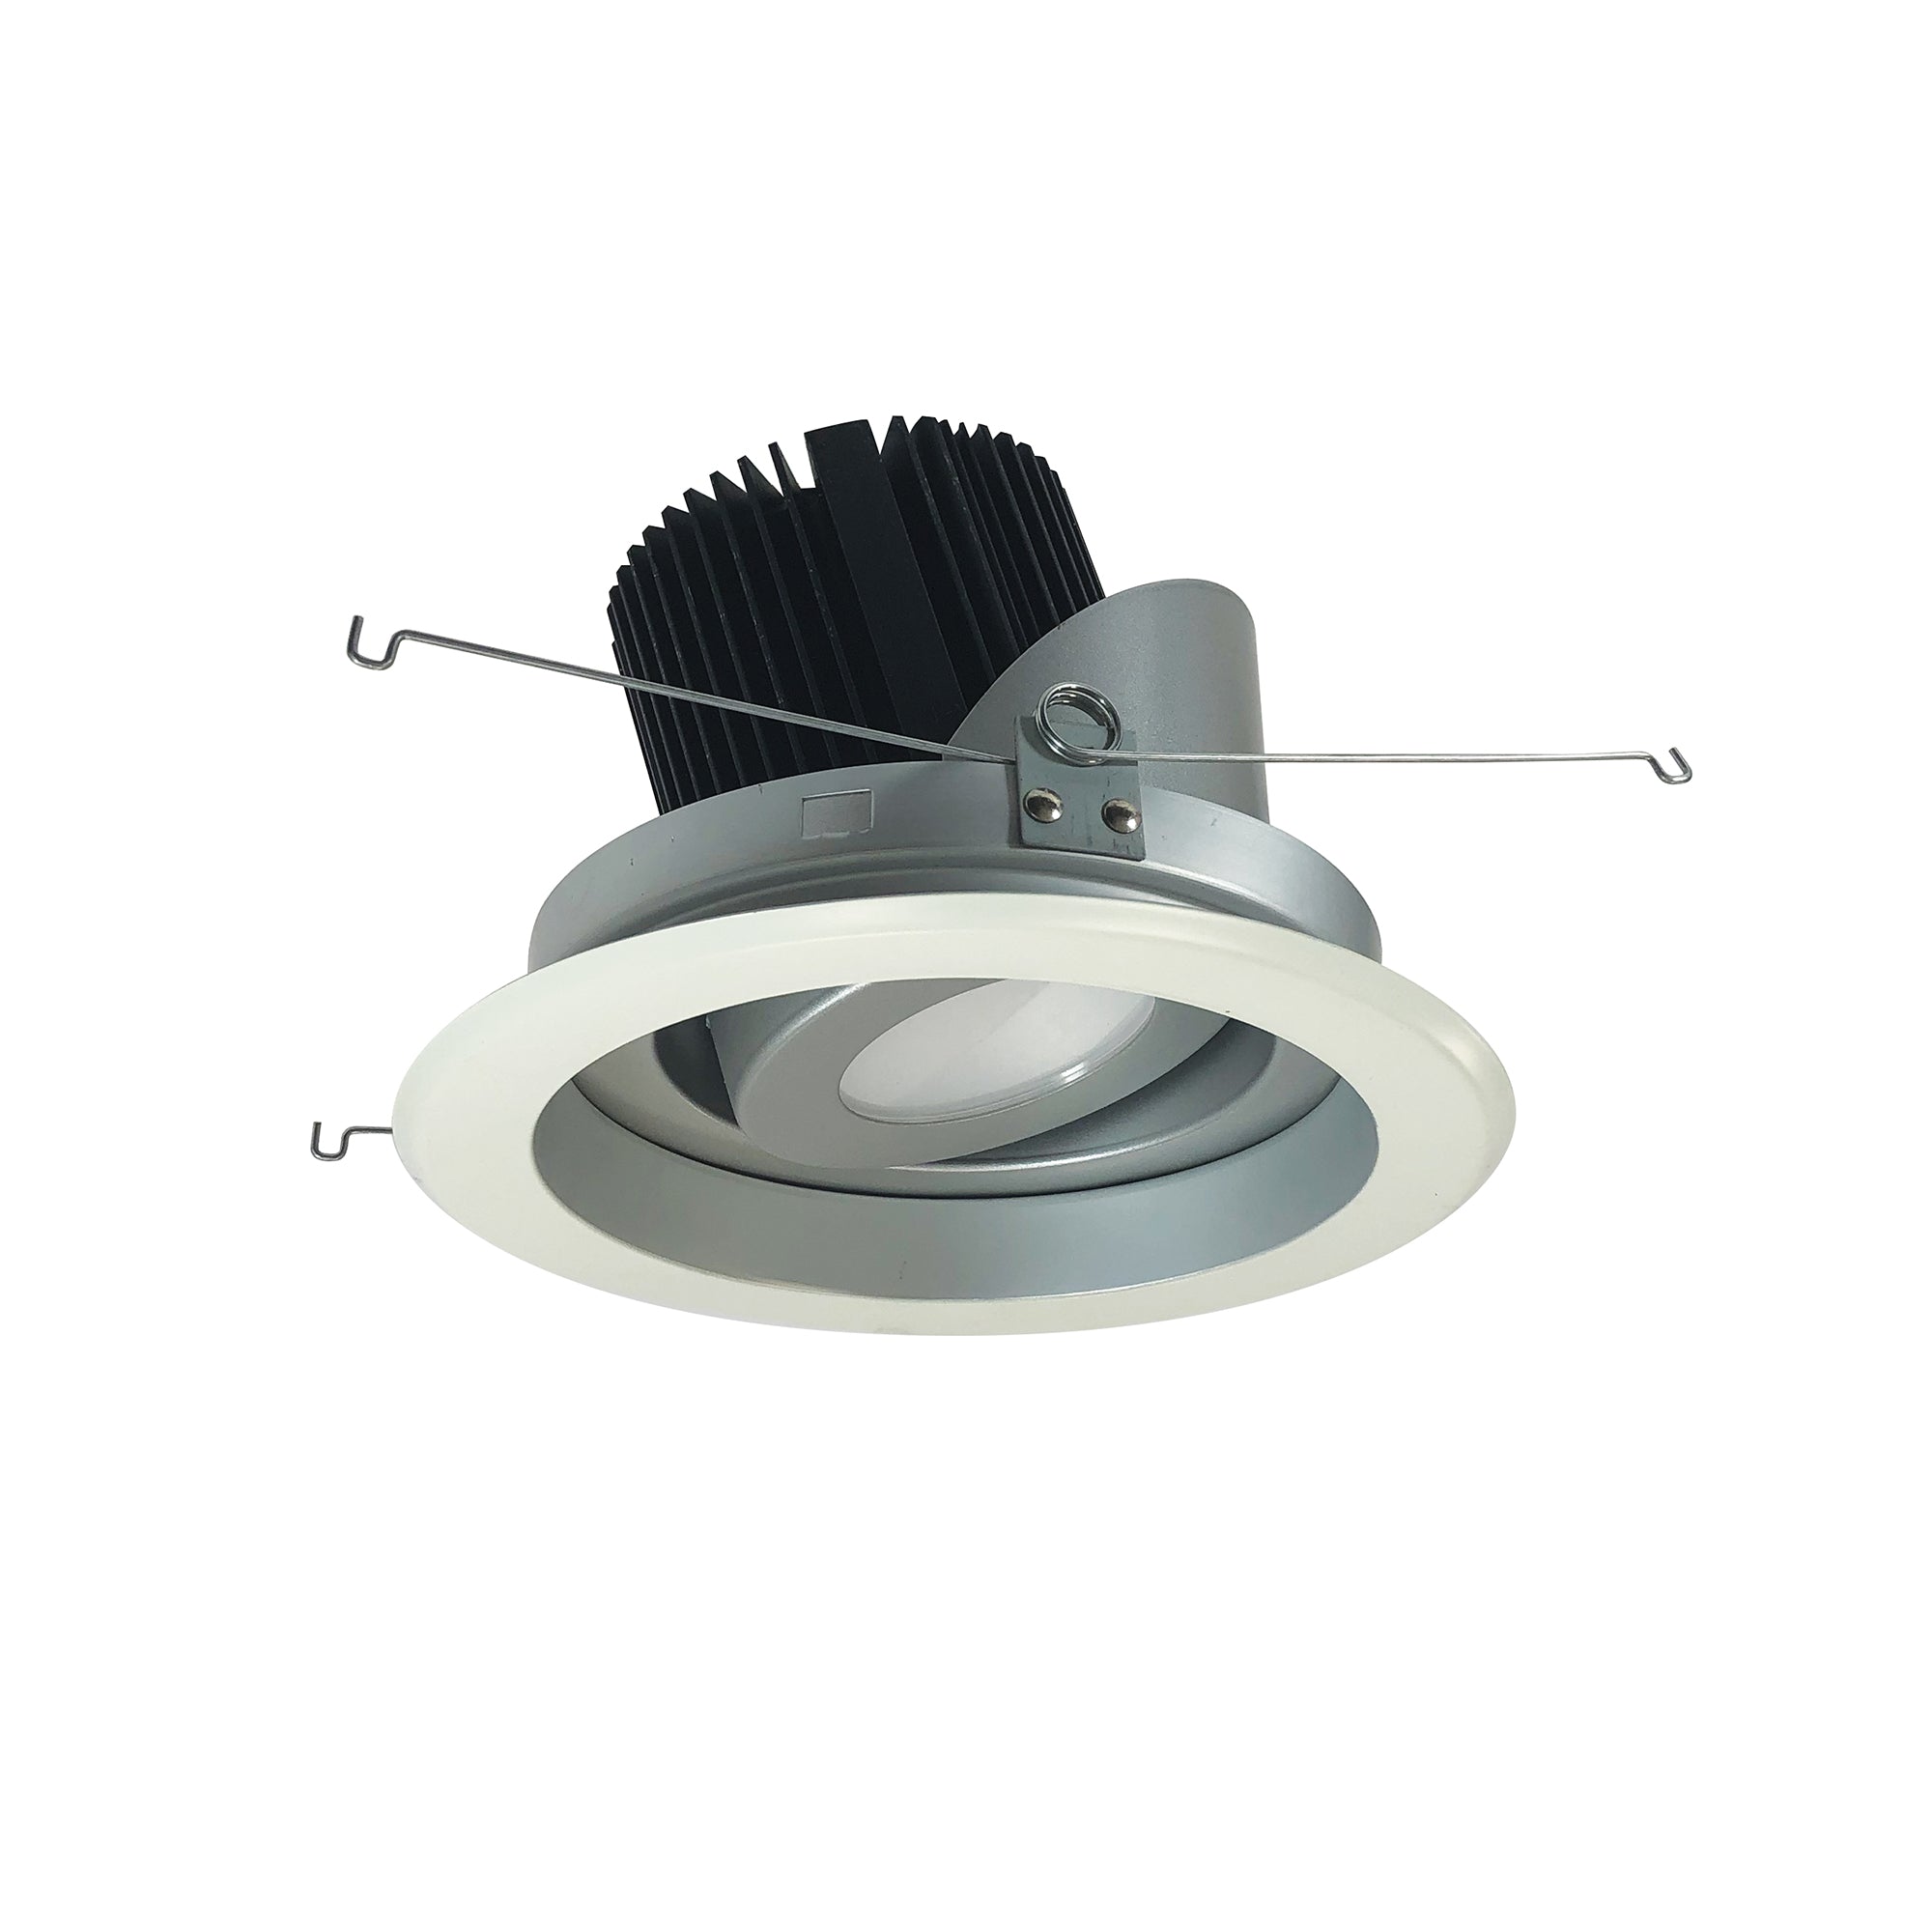 Nora Lighting NRM2-619L2527FHZW - Recessed - 6 Inch Marquise II Round Regressed Adj. Reflector, Flood, 2500lm, 2700K, Haze/White (Not Compatible with NHRM2-625 Housings)